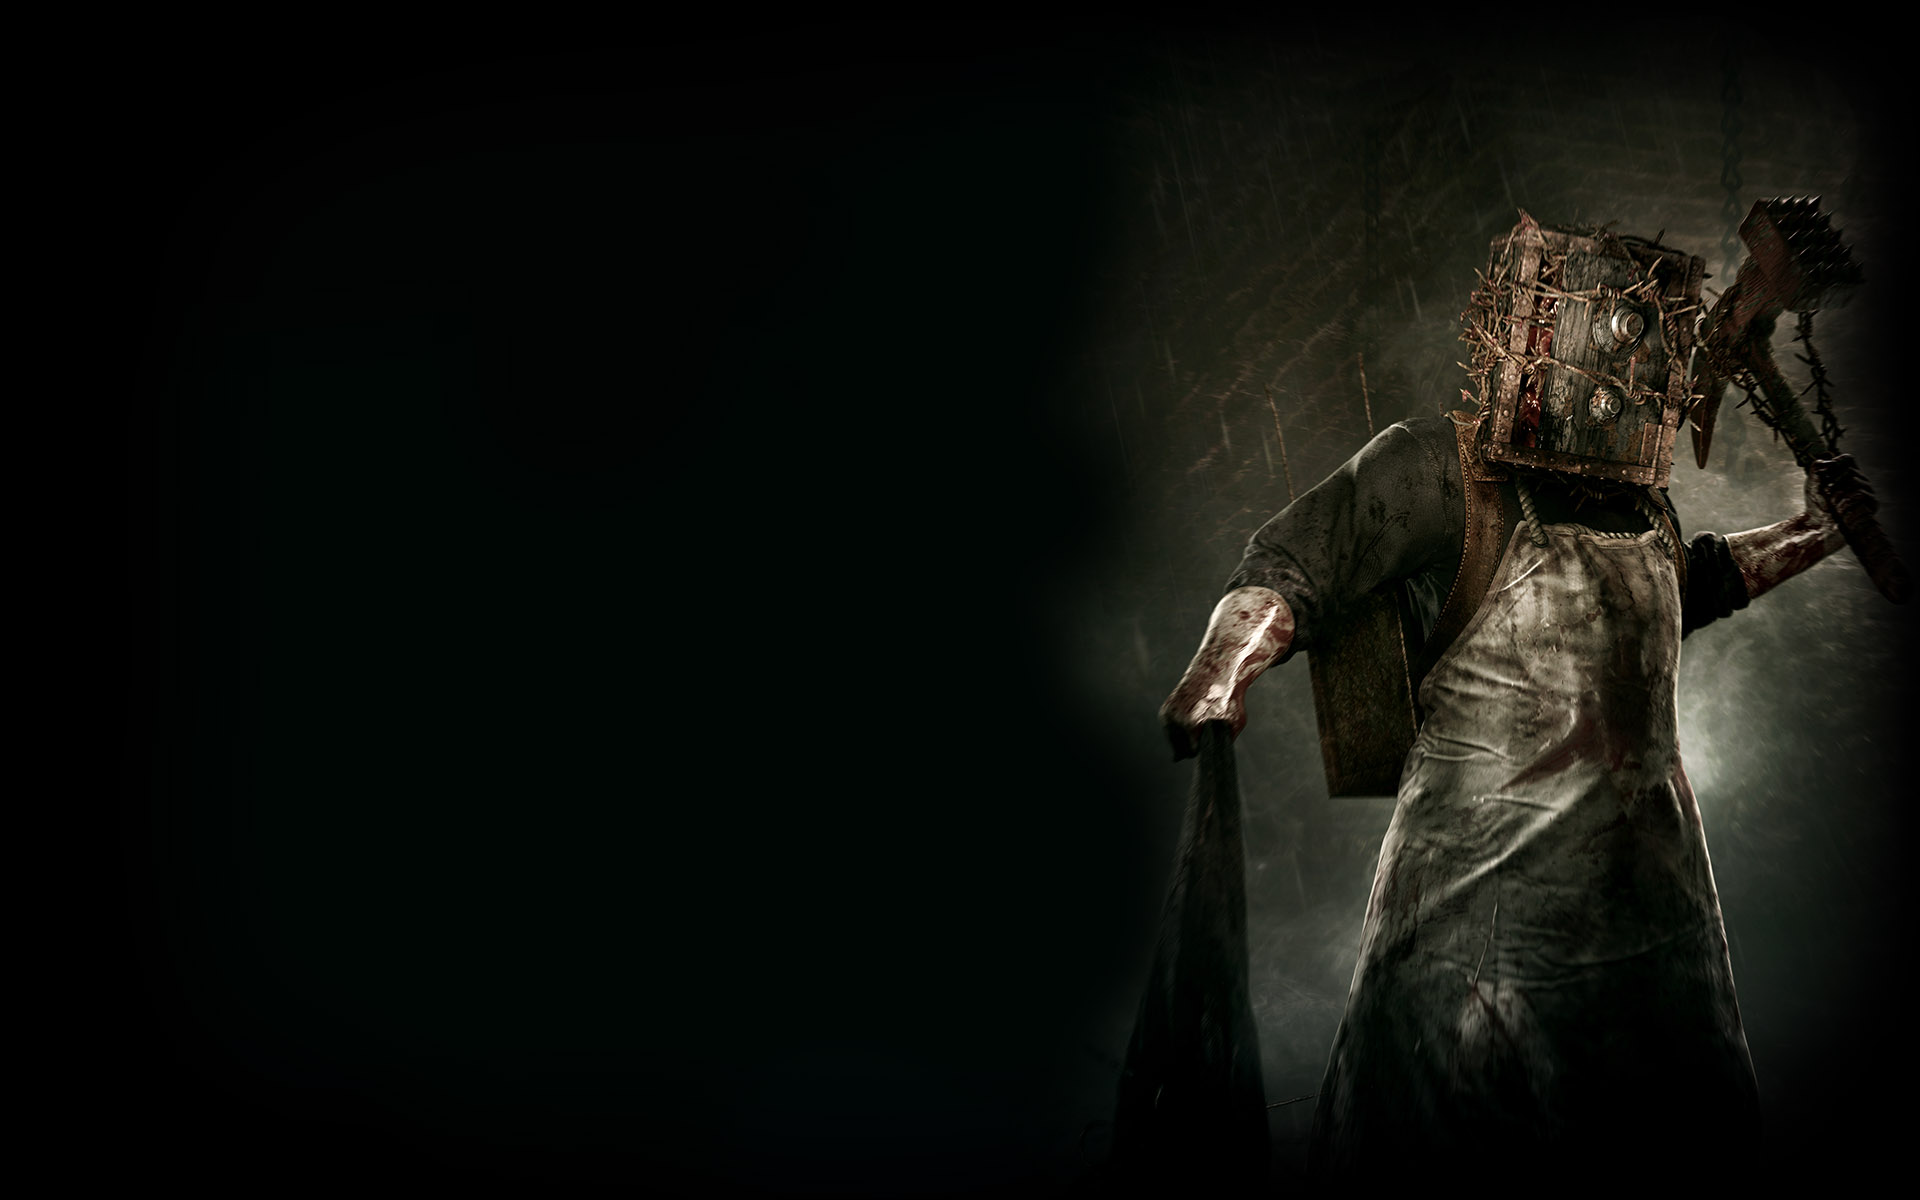 The Evil Within Community Items · Steamdb